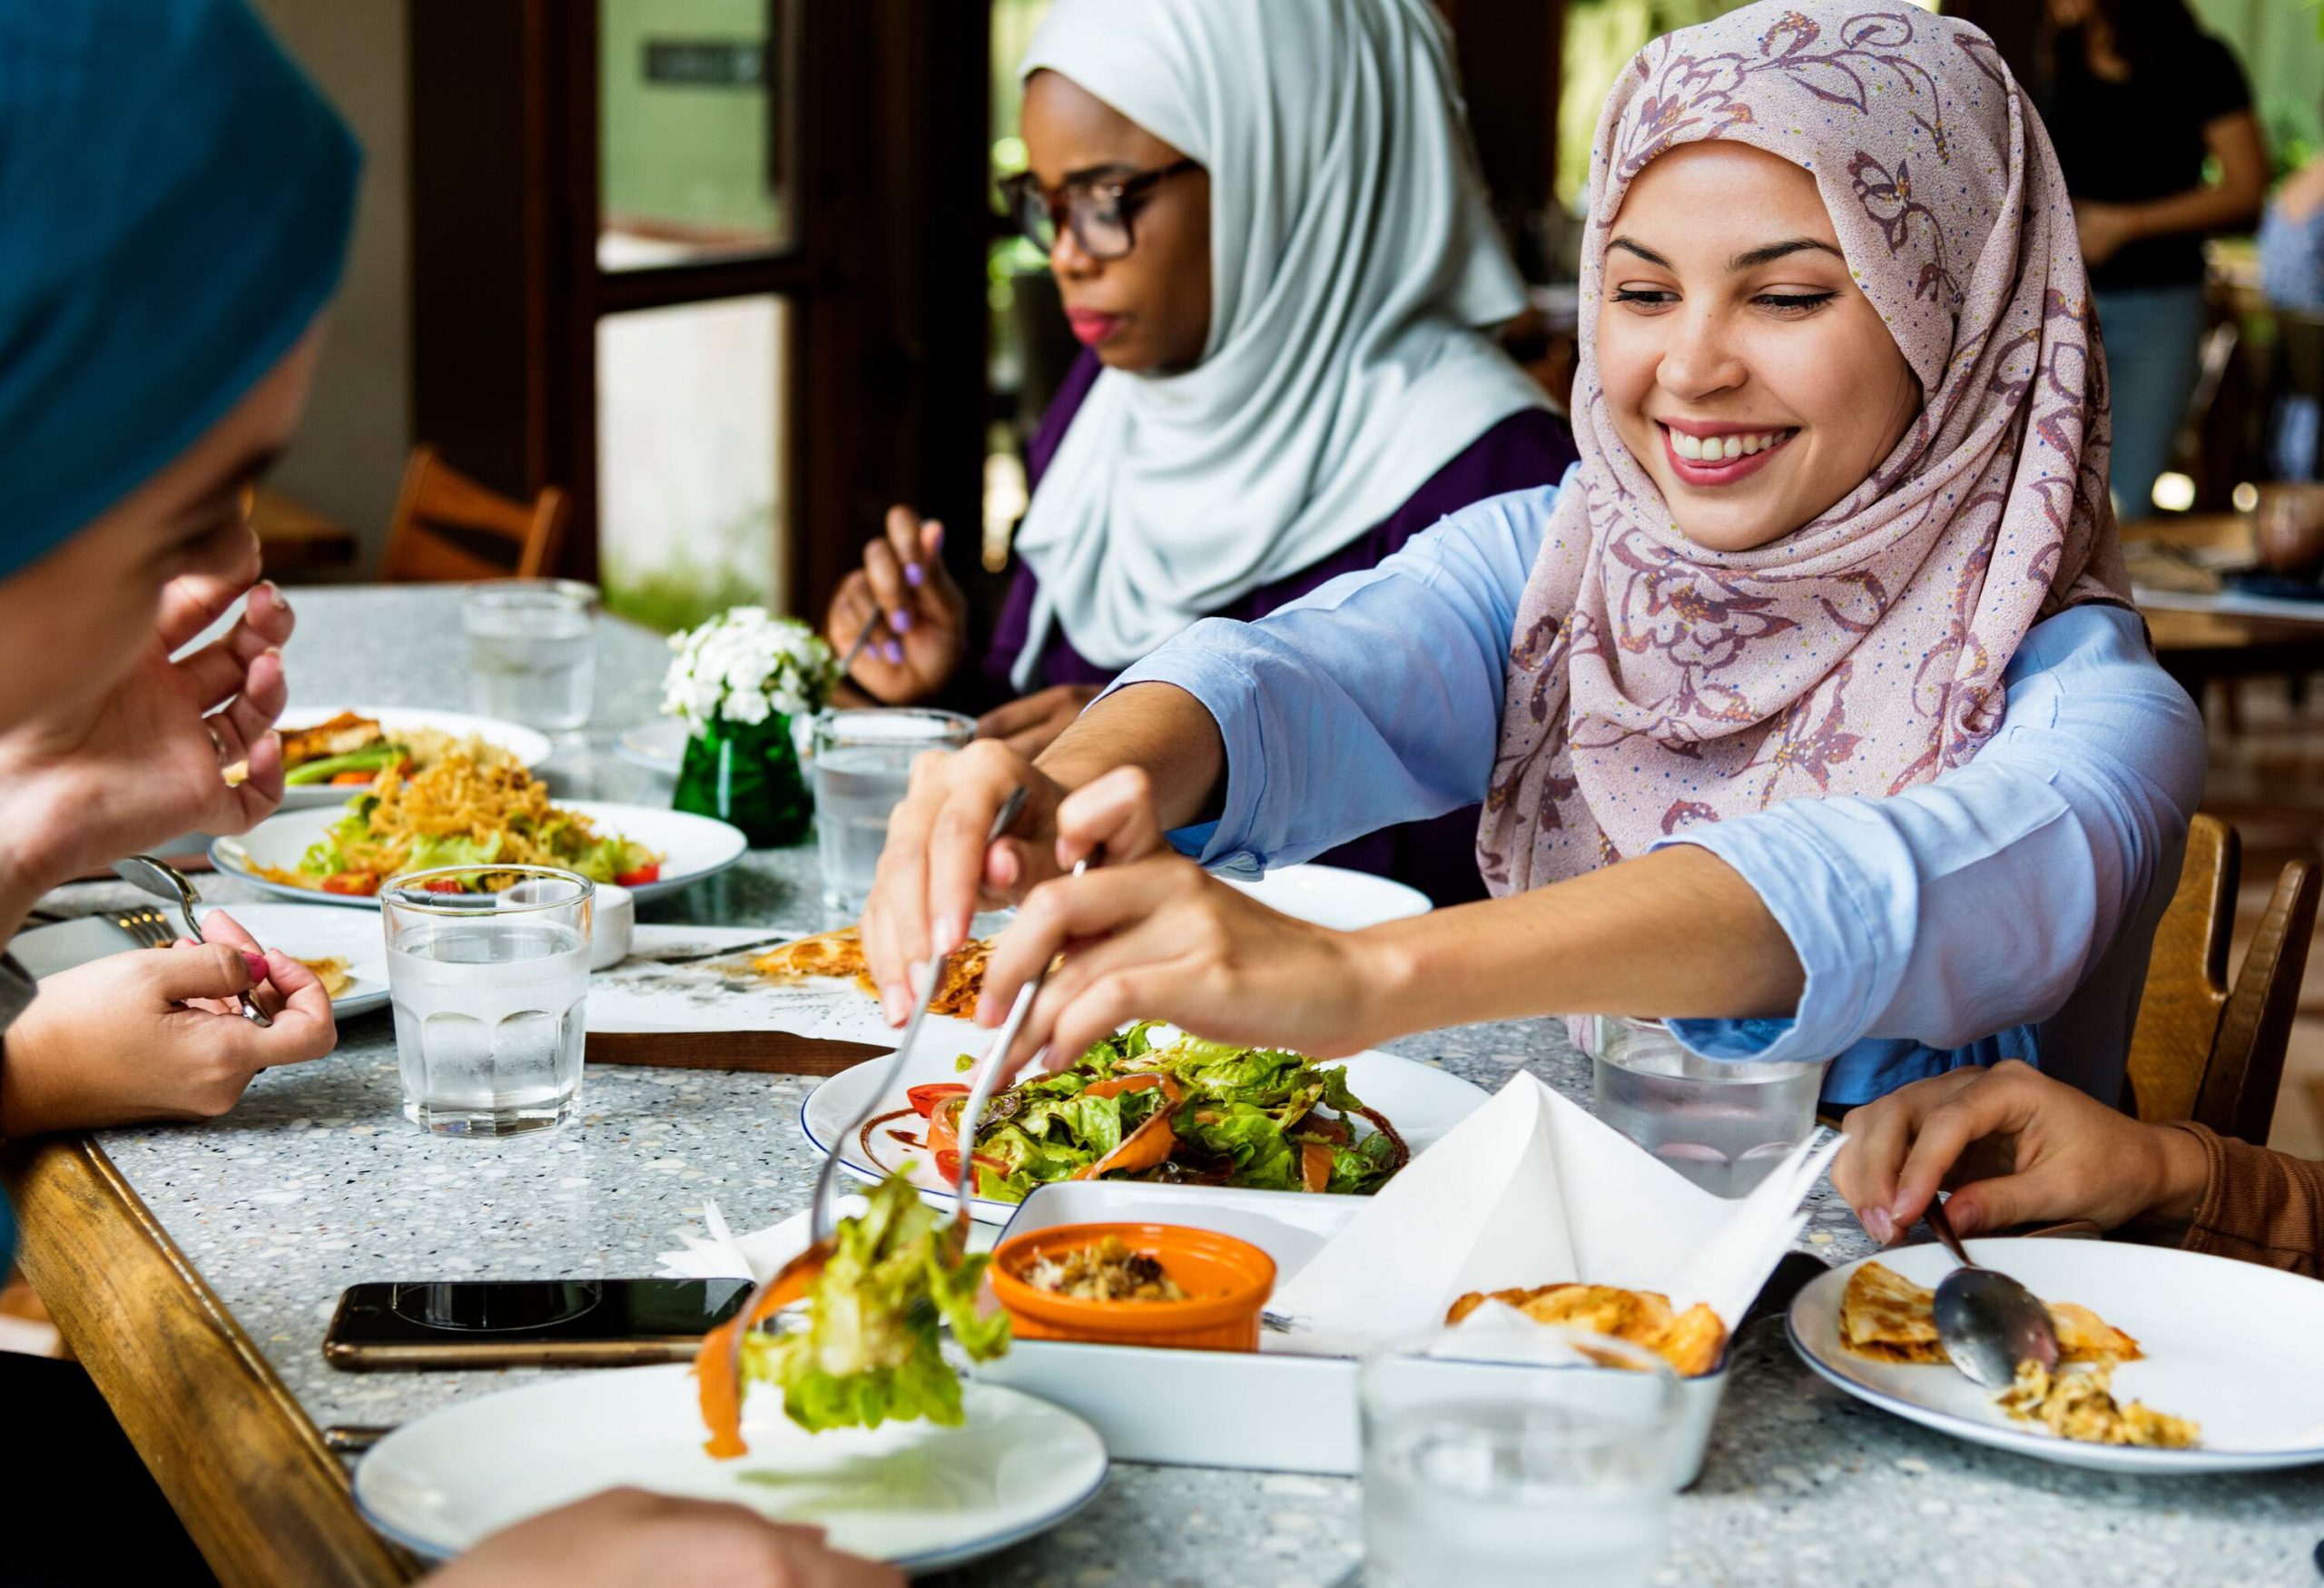 Happy women in hijab shares various dishes on white plates.